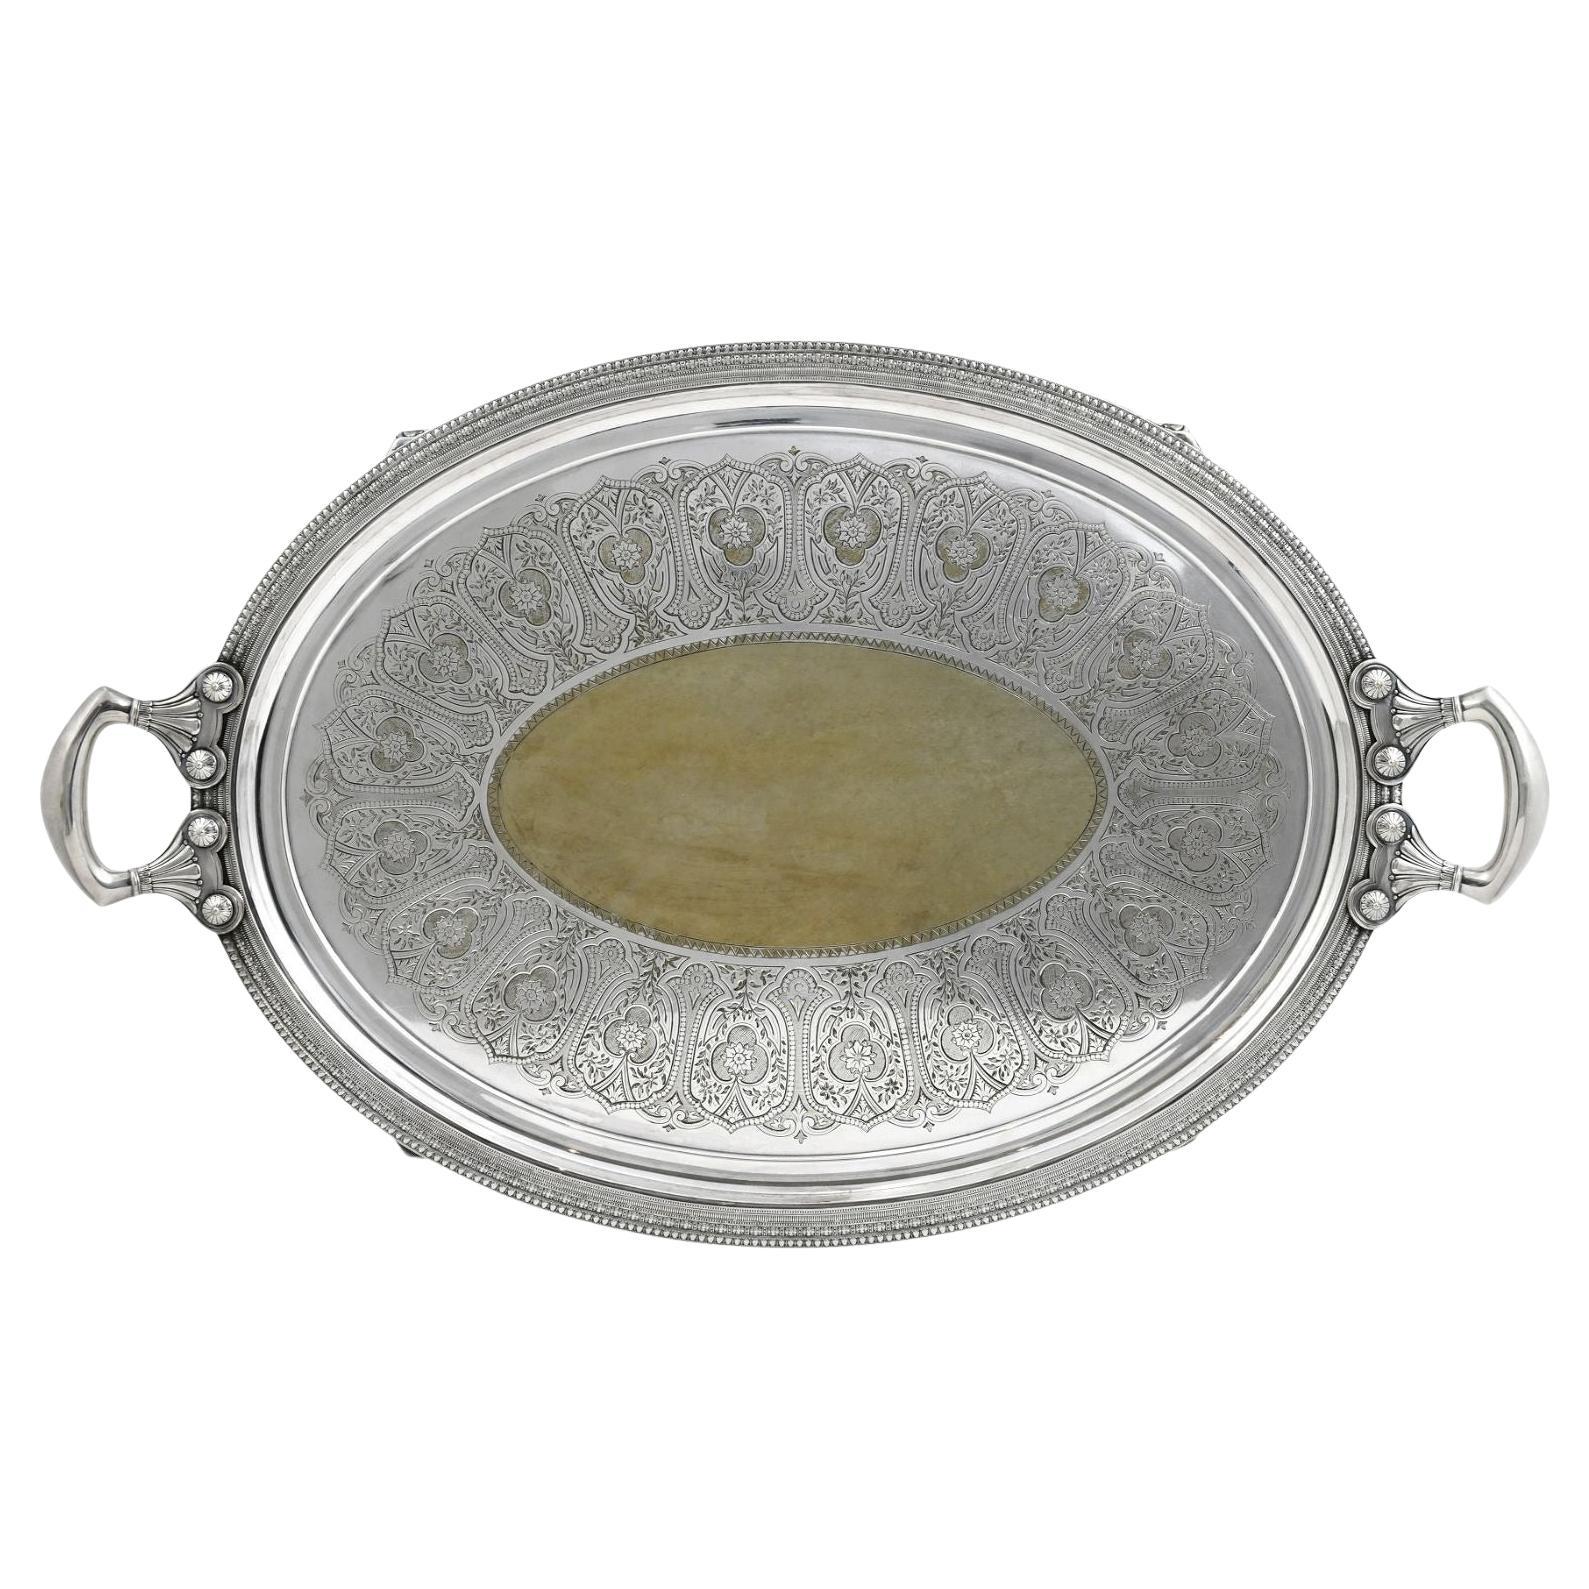 Exceptional Silverplate Salver Serving Tray by Tiffany and Co.